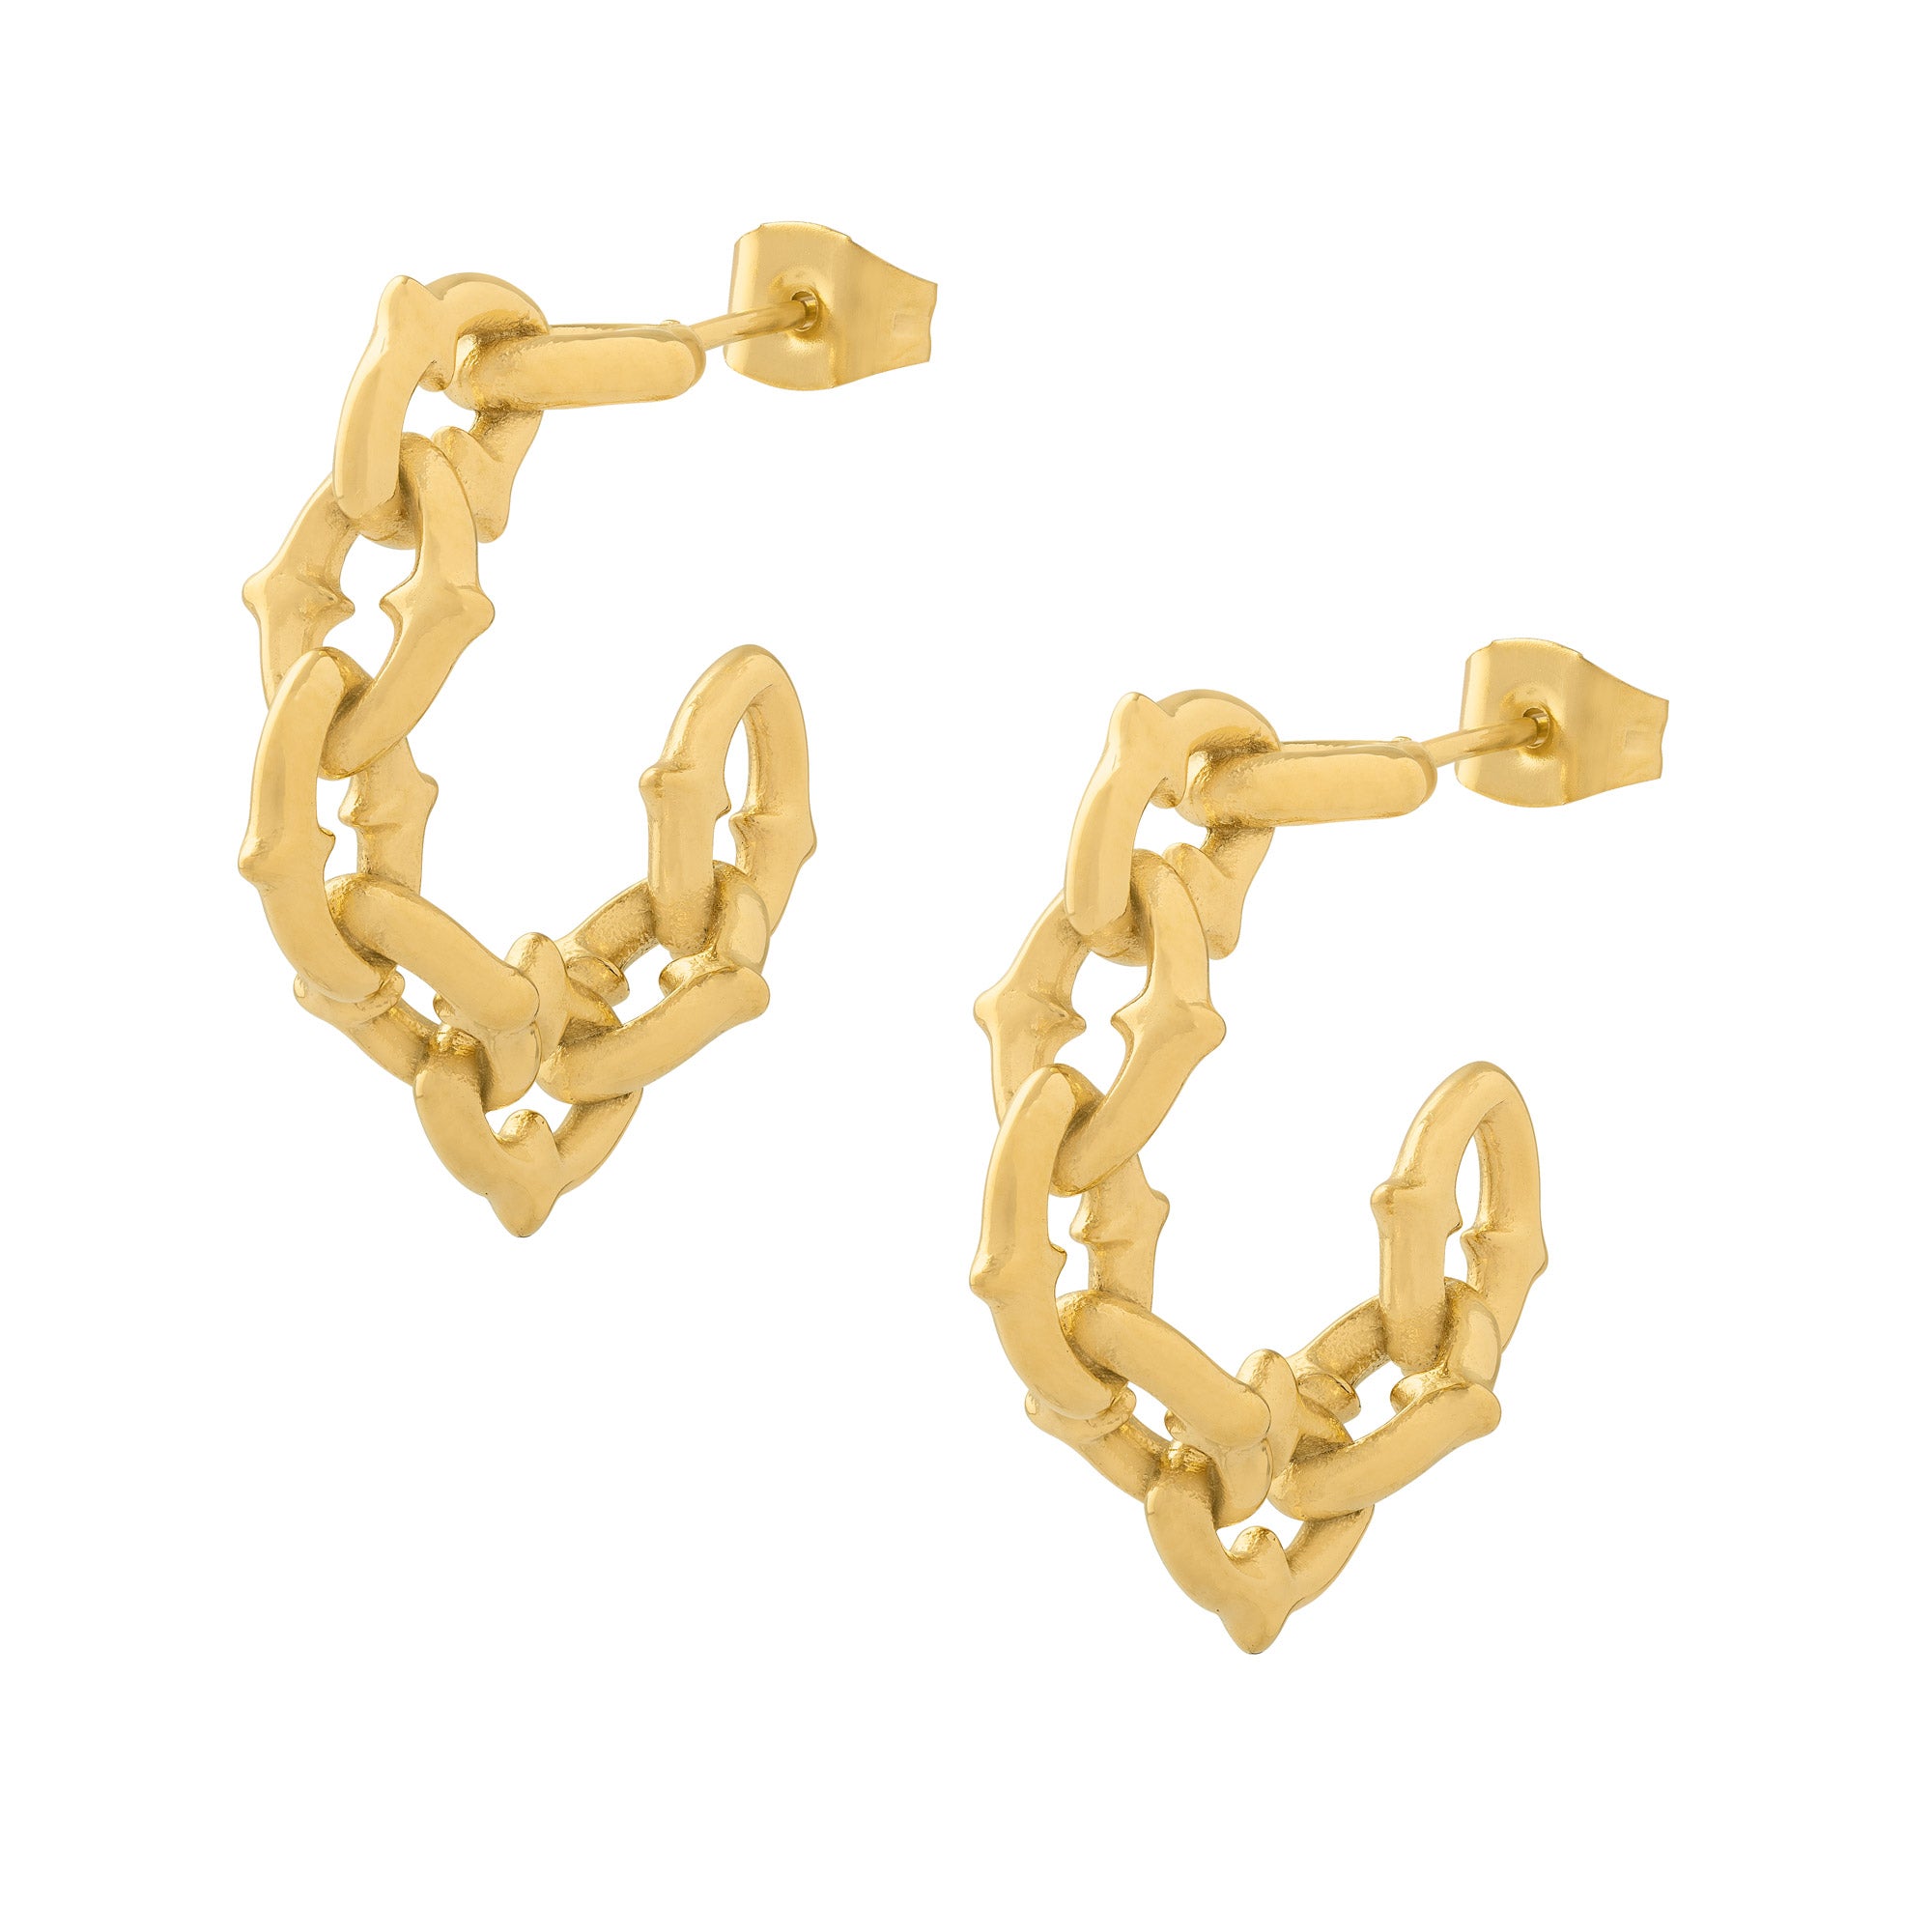 Unisex punk gothic chain spike gold earrings